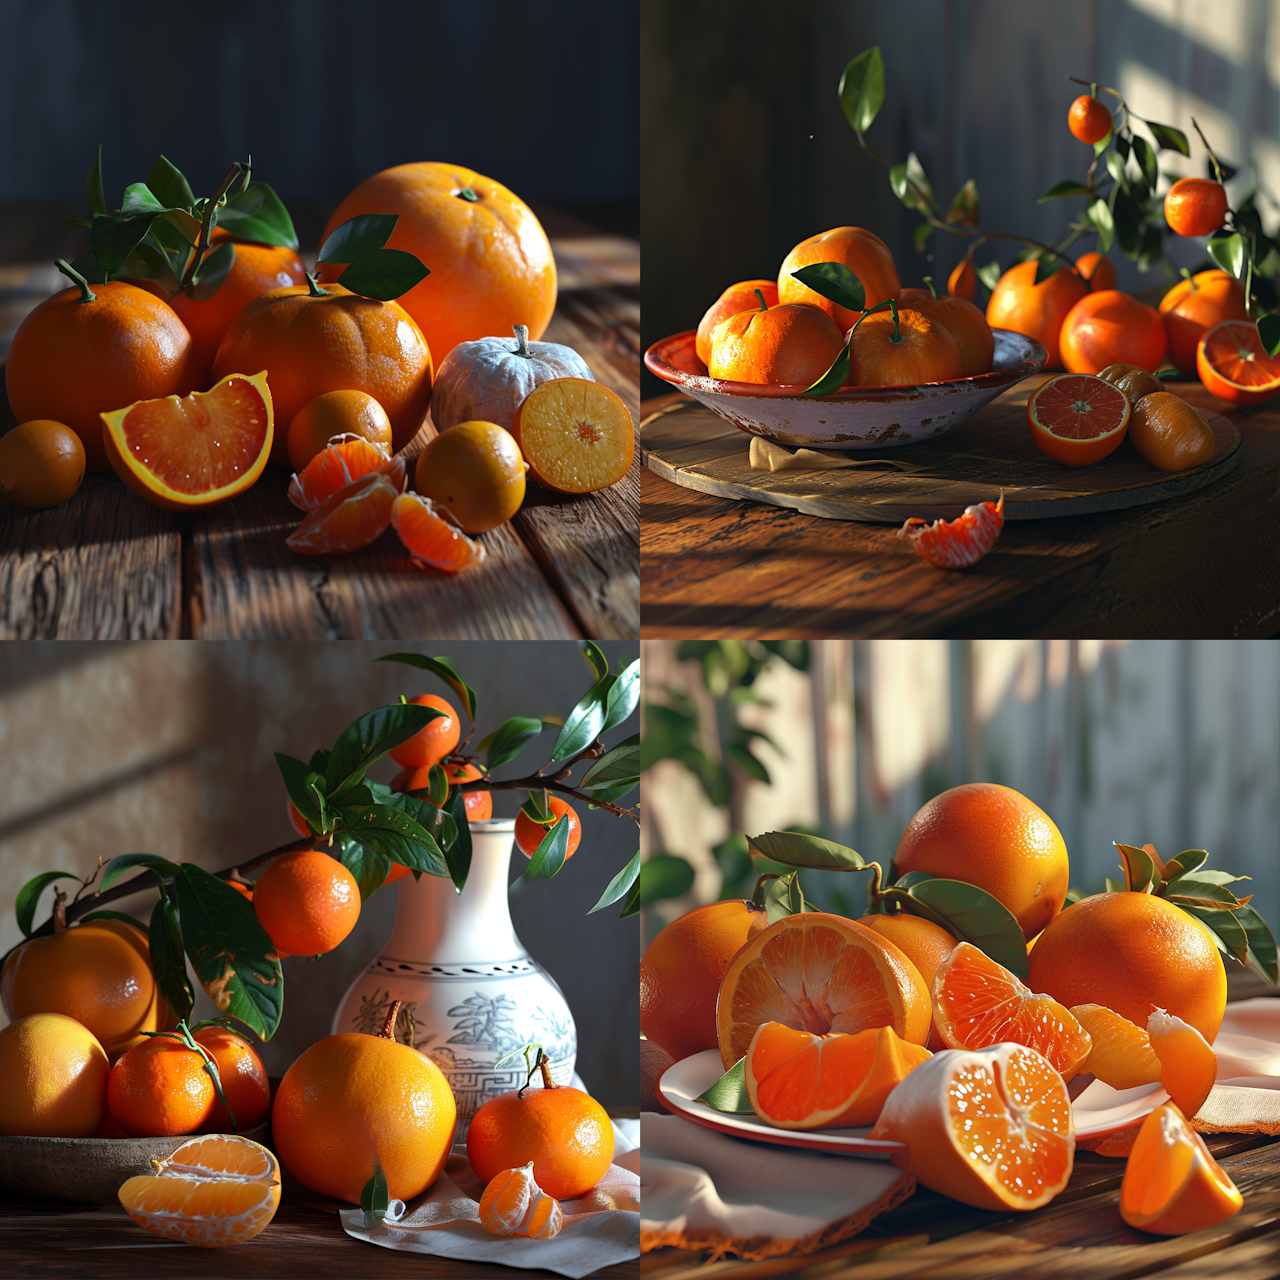 oranges and persimmons photorealistic 8k